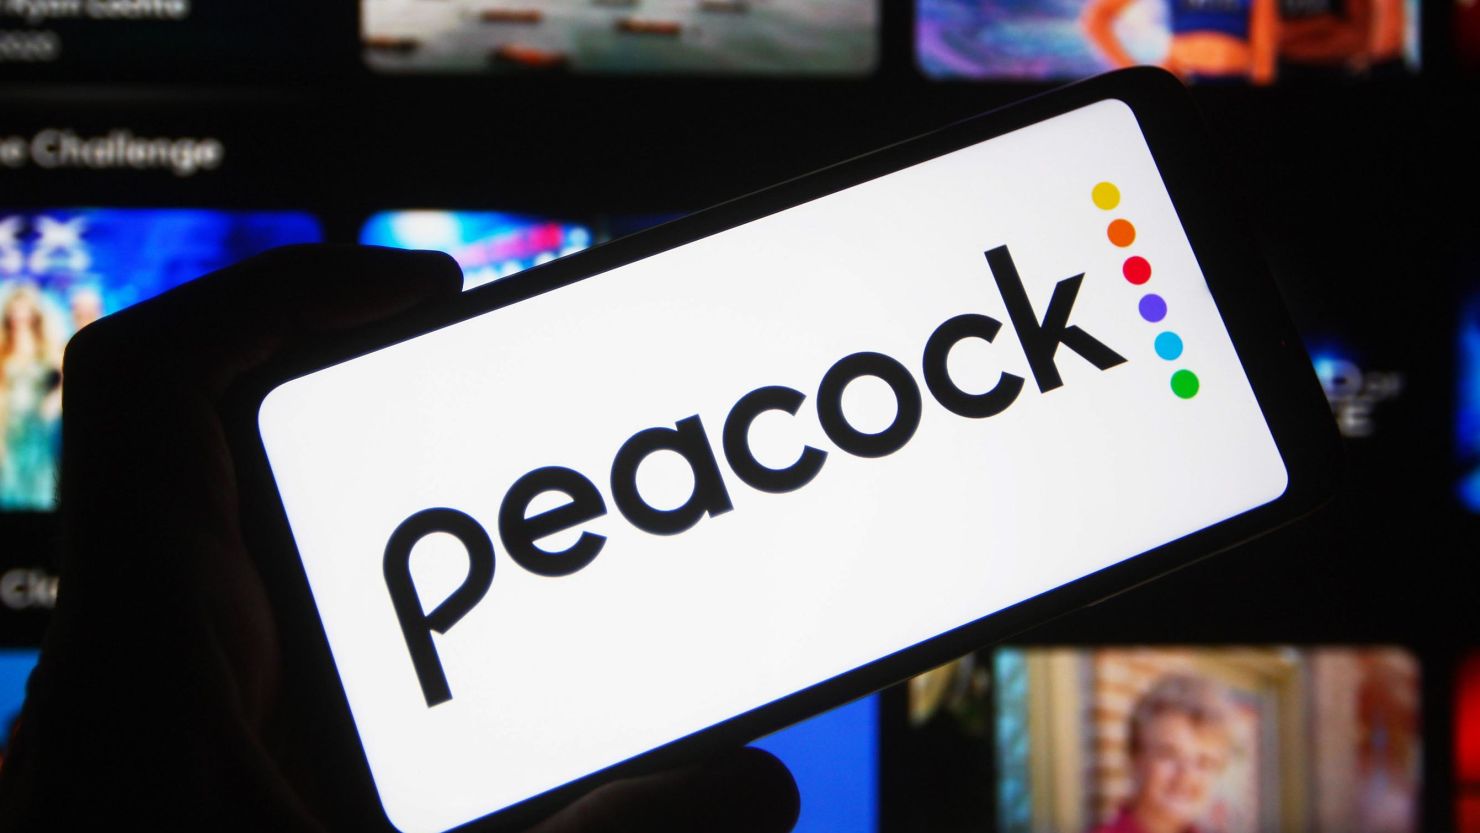 Peacock Streaming Service Gets a Price Increase Three Years After Launch